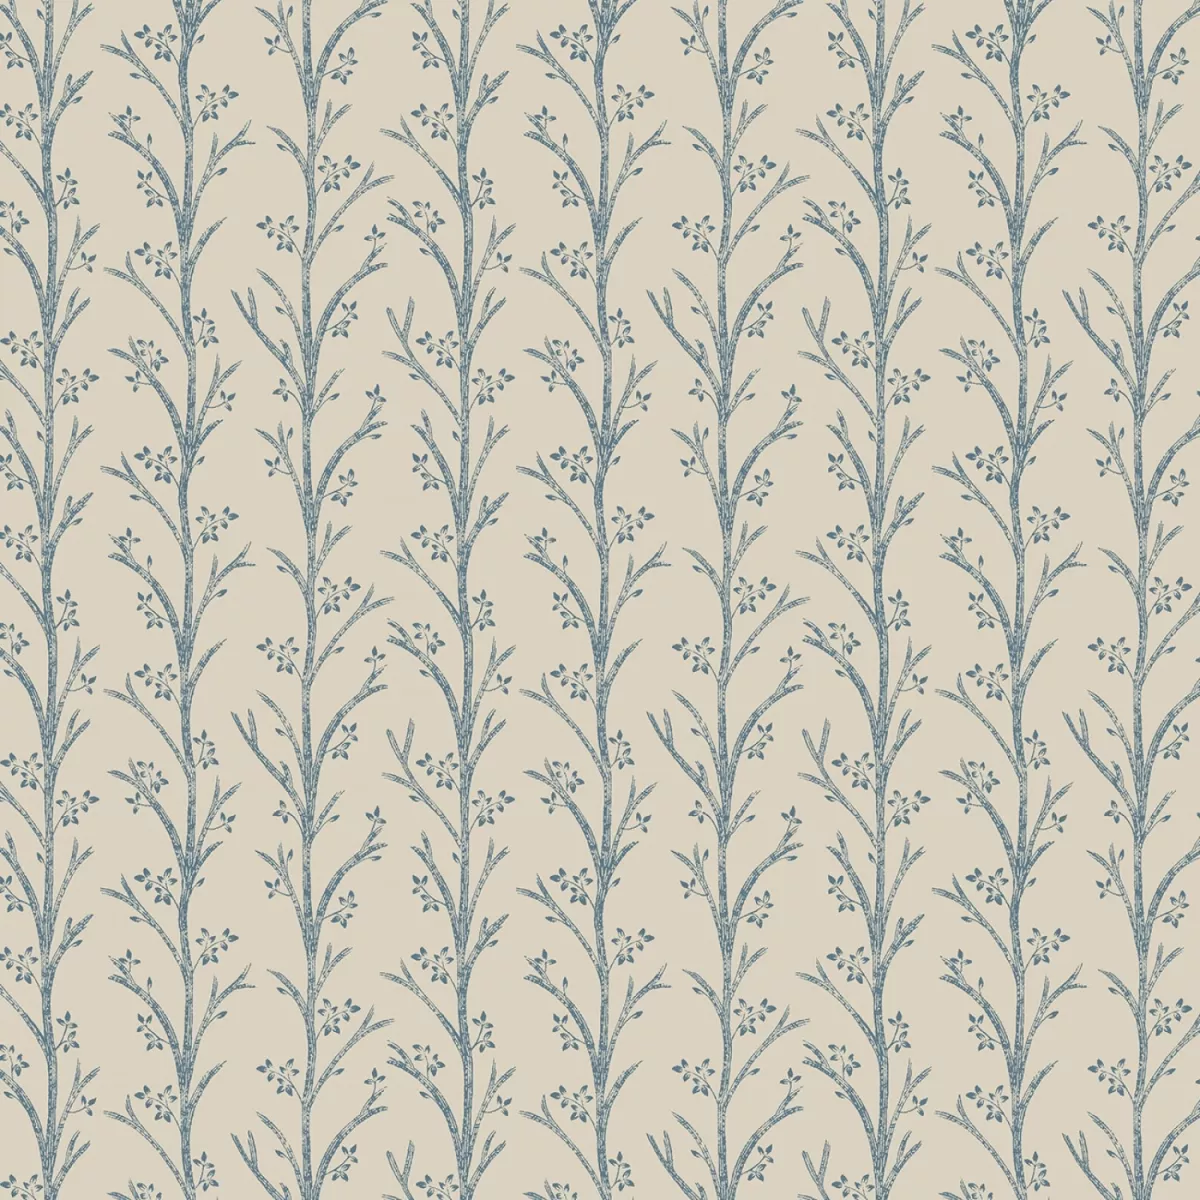 Windham - Linen Blooming Branch - Willow by Whistler Studio - 52565-2